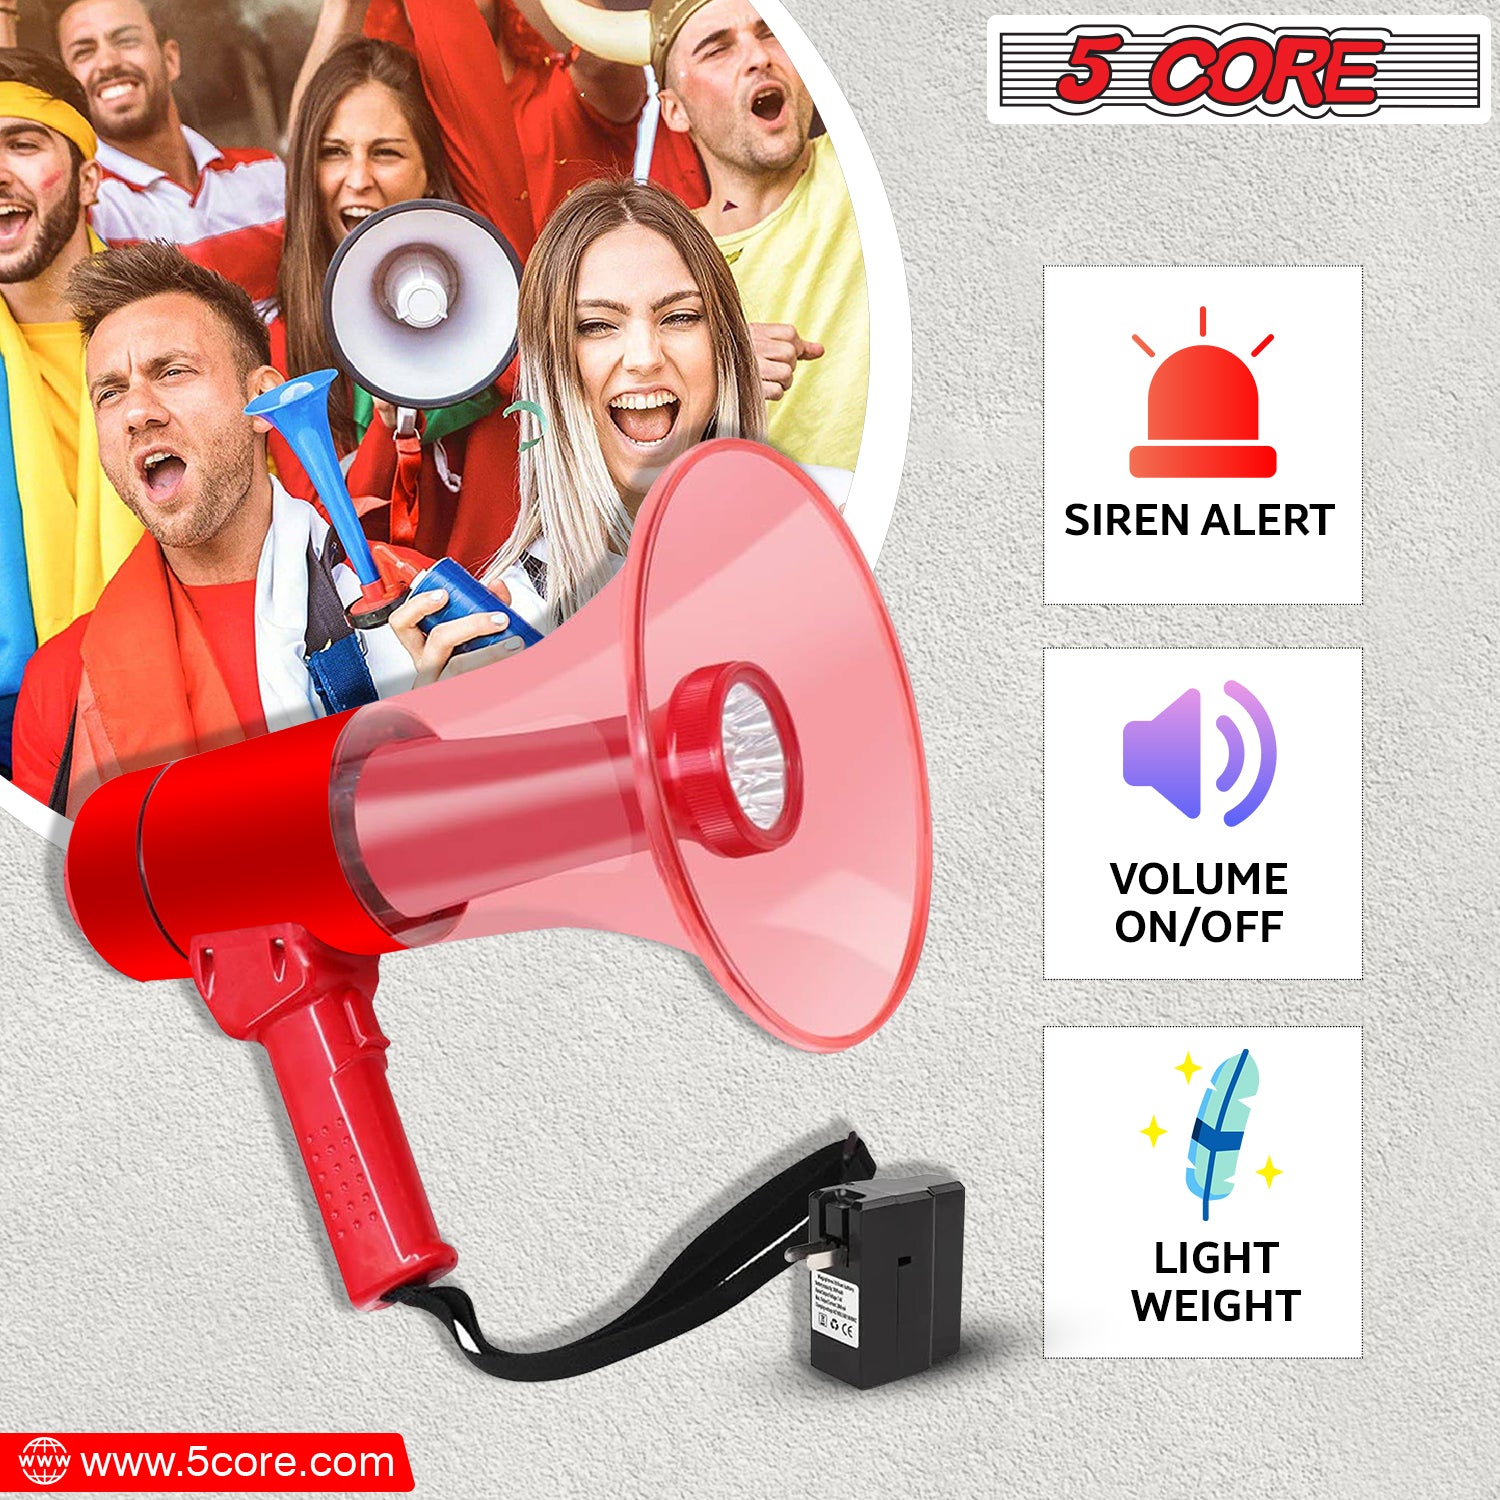 Red 5 Core portable megaphone with an adjustable strap, designed for comfortable carrying during events.